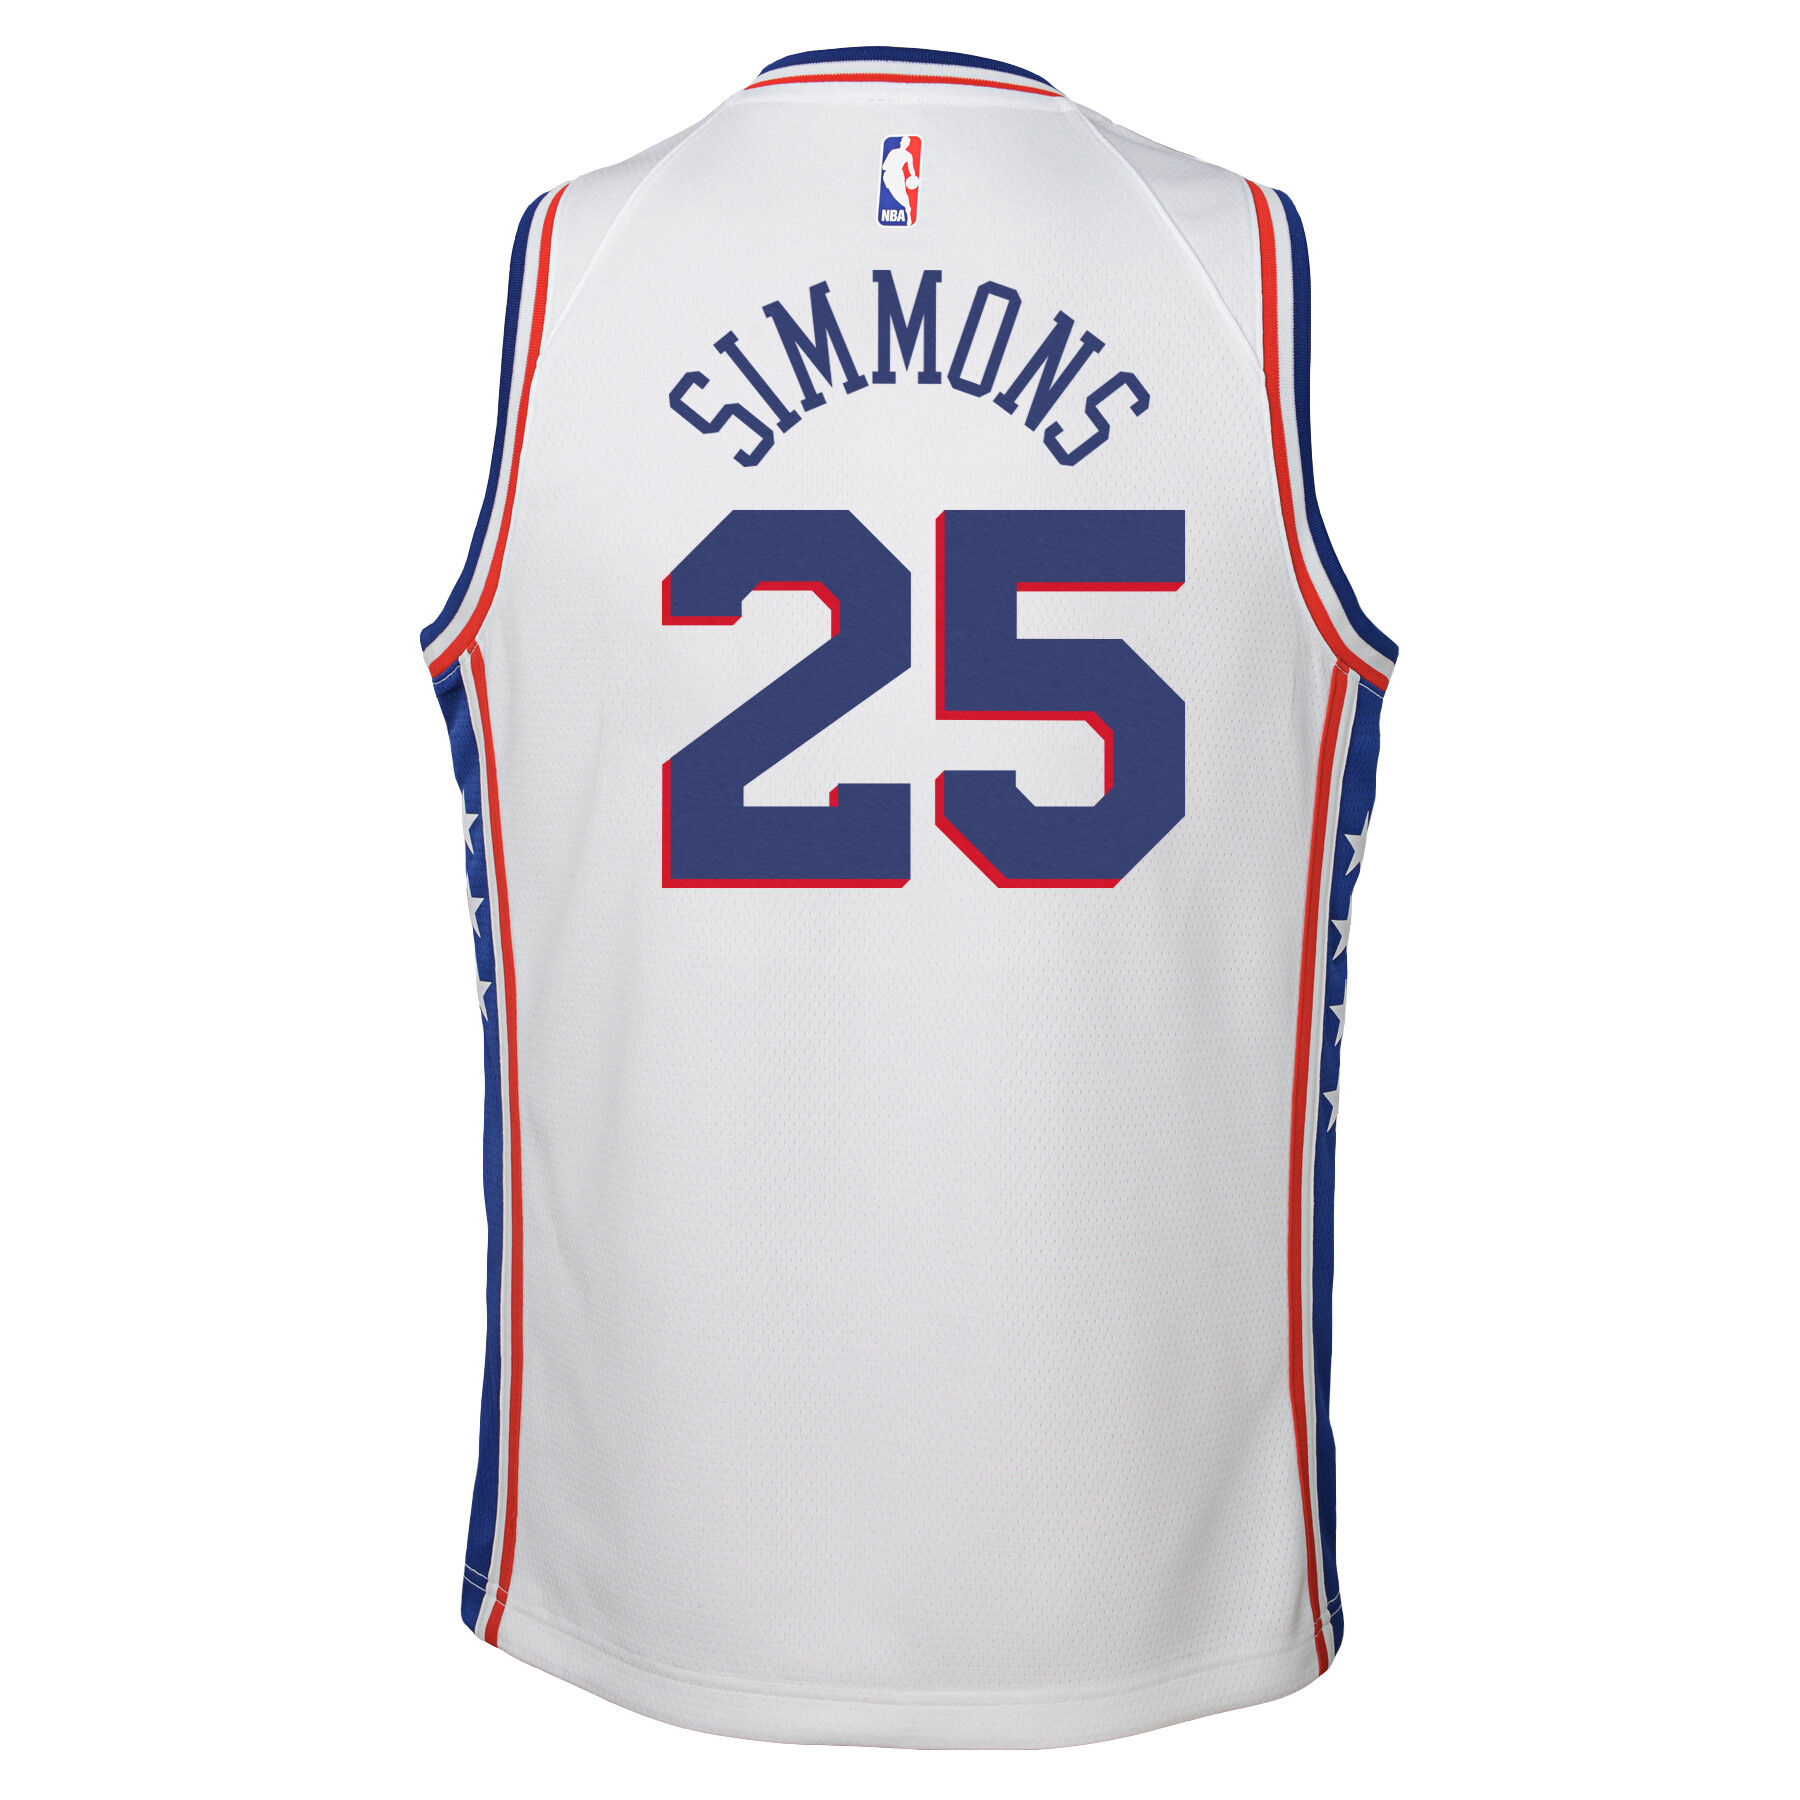 sixers association jersey